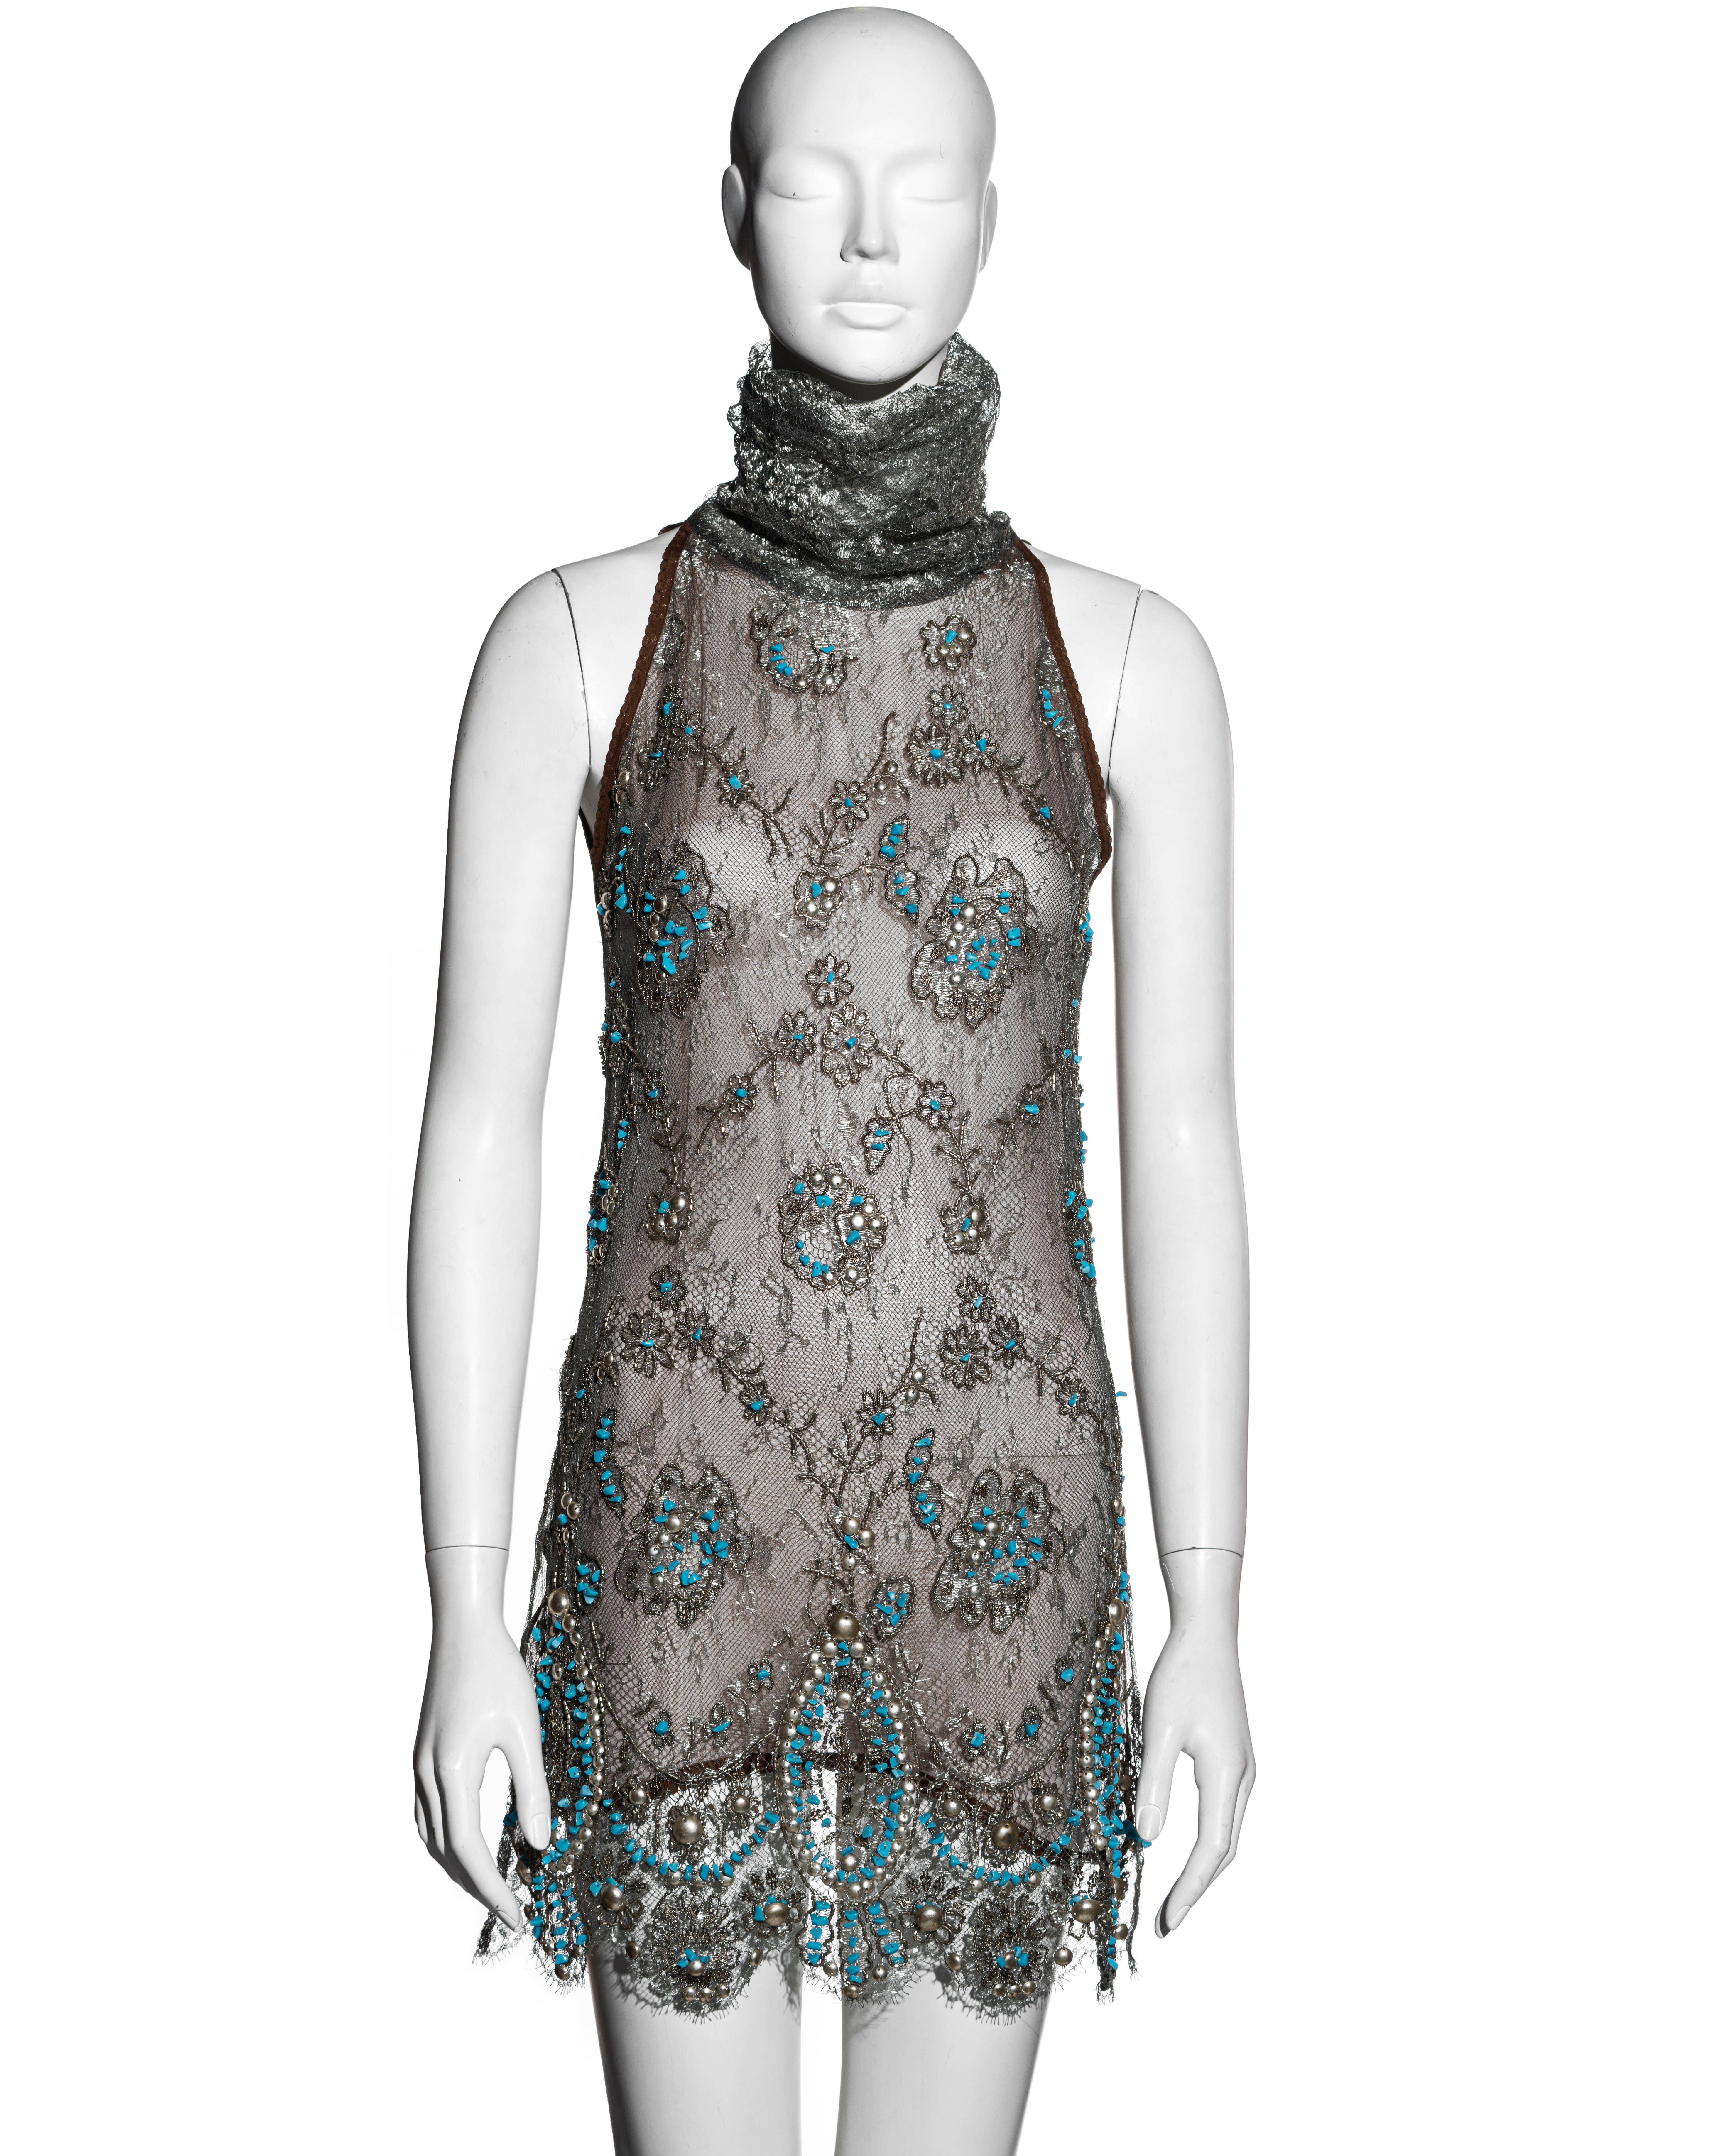 Silver Gianfranco Ferre silver lamé lace embellished mini dress, ss 2006 For Sale